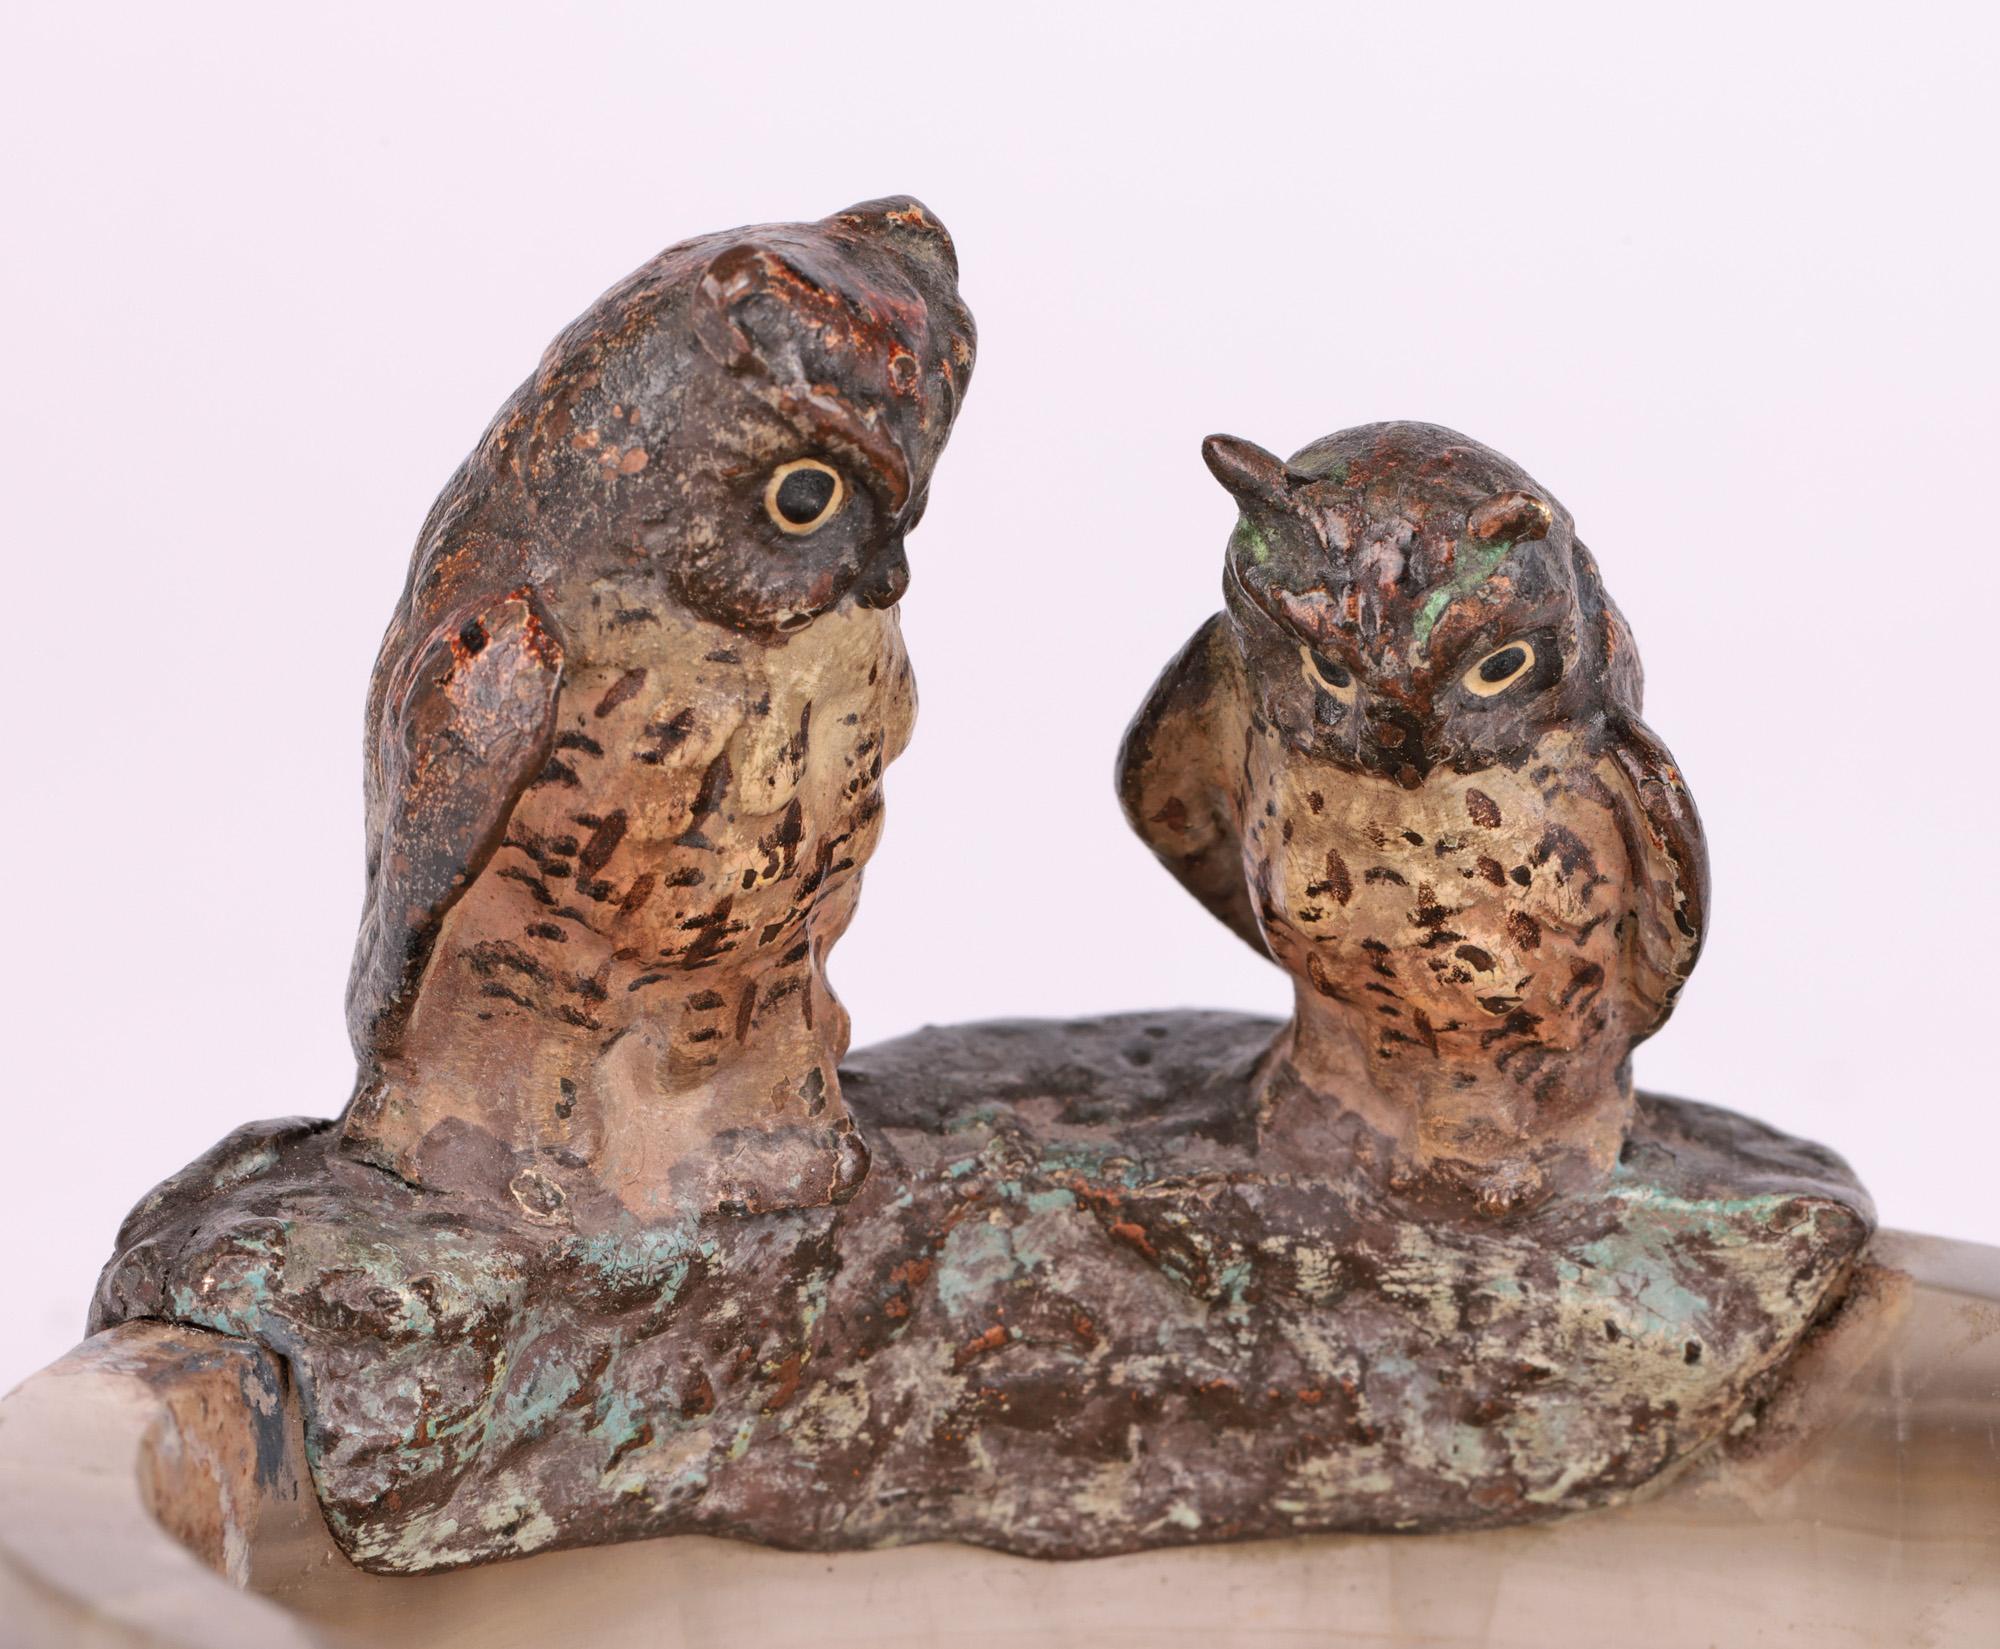 A delightful early Art Deco Austrian marble pin dish mounted with two cold painted owls attributed to Franz Xaver Bergmann (Austrian, 1861-1936) and dating from around 1920.
Franz Bergmann was a renowned maker of detailed and colorful works in